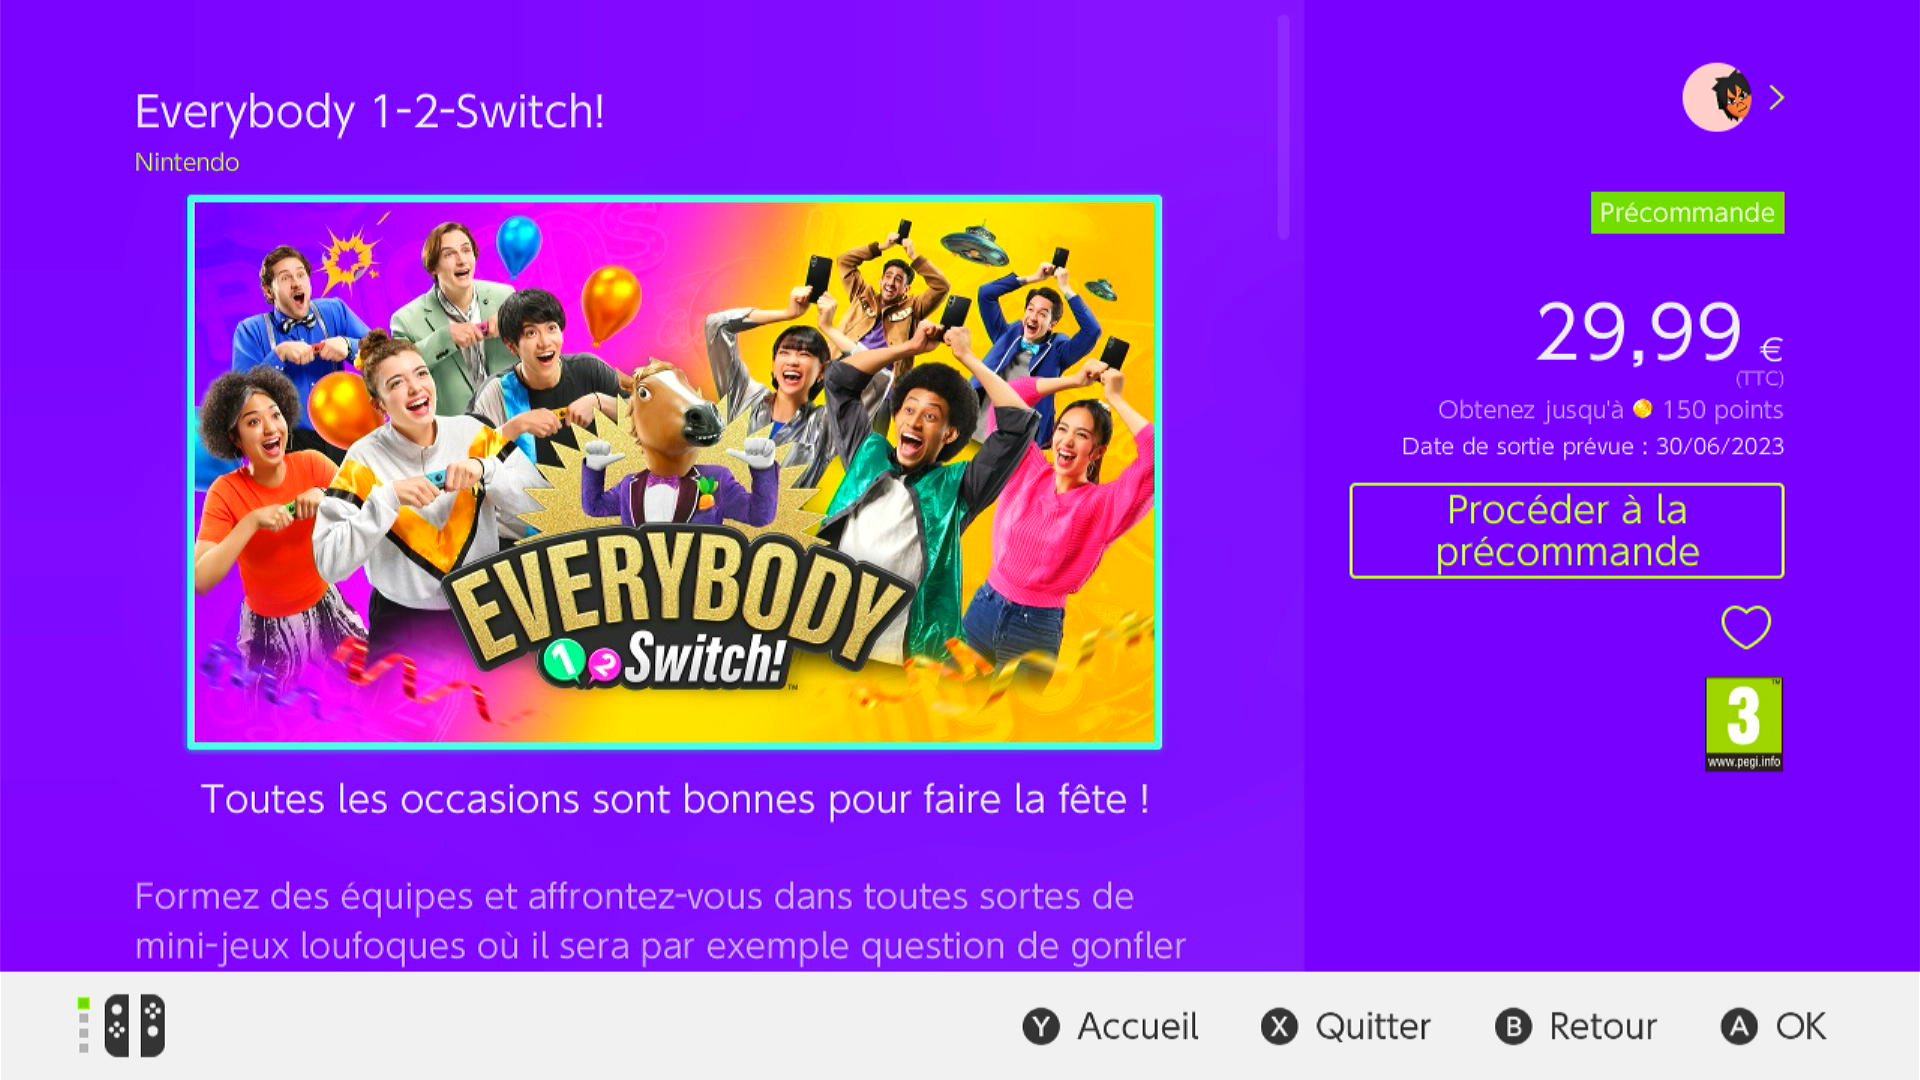 https://www.nintendo-master.com/fichiers/news/168569566912/everybody-1-2-switch-eshop-fiche-nm-1.png